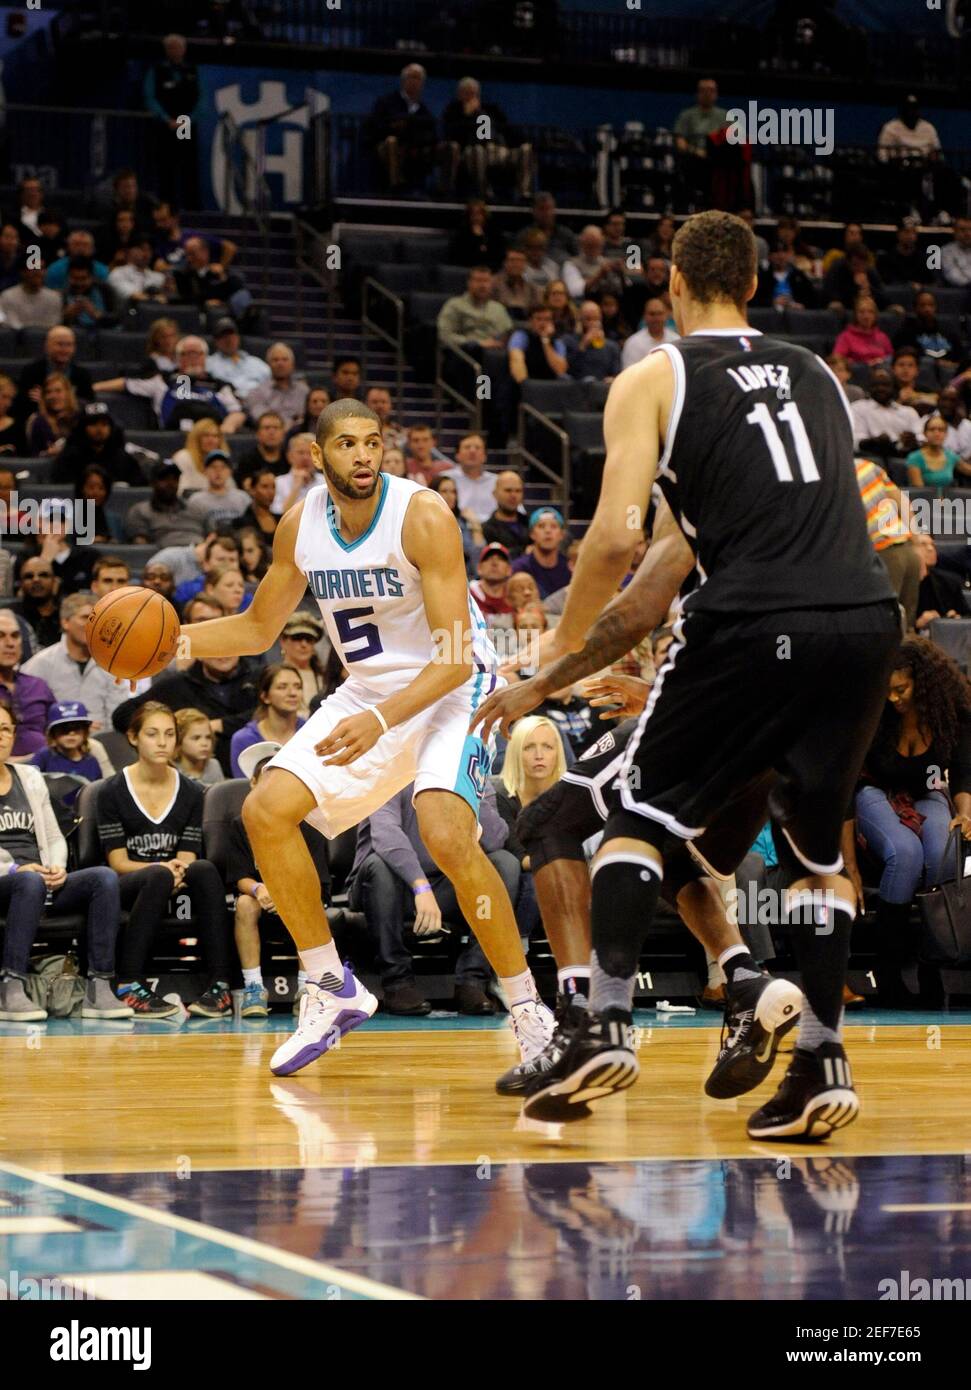 Nov 18, 2015; Charlotte, NC, USA; Charlotte Hornets guard forward Nicolas  Batum (5) prepares to pass the ball as he is guarded by Brooklyn Nets  center Brook Lopez (11) during the first